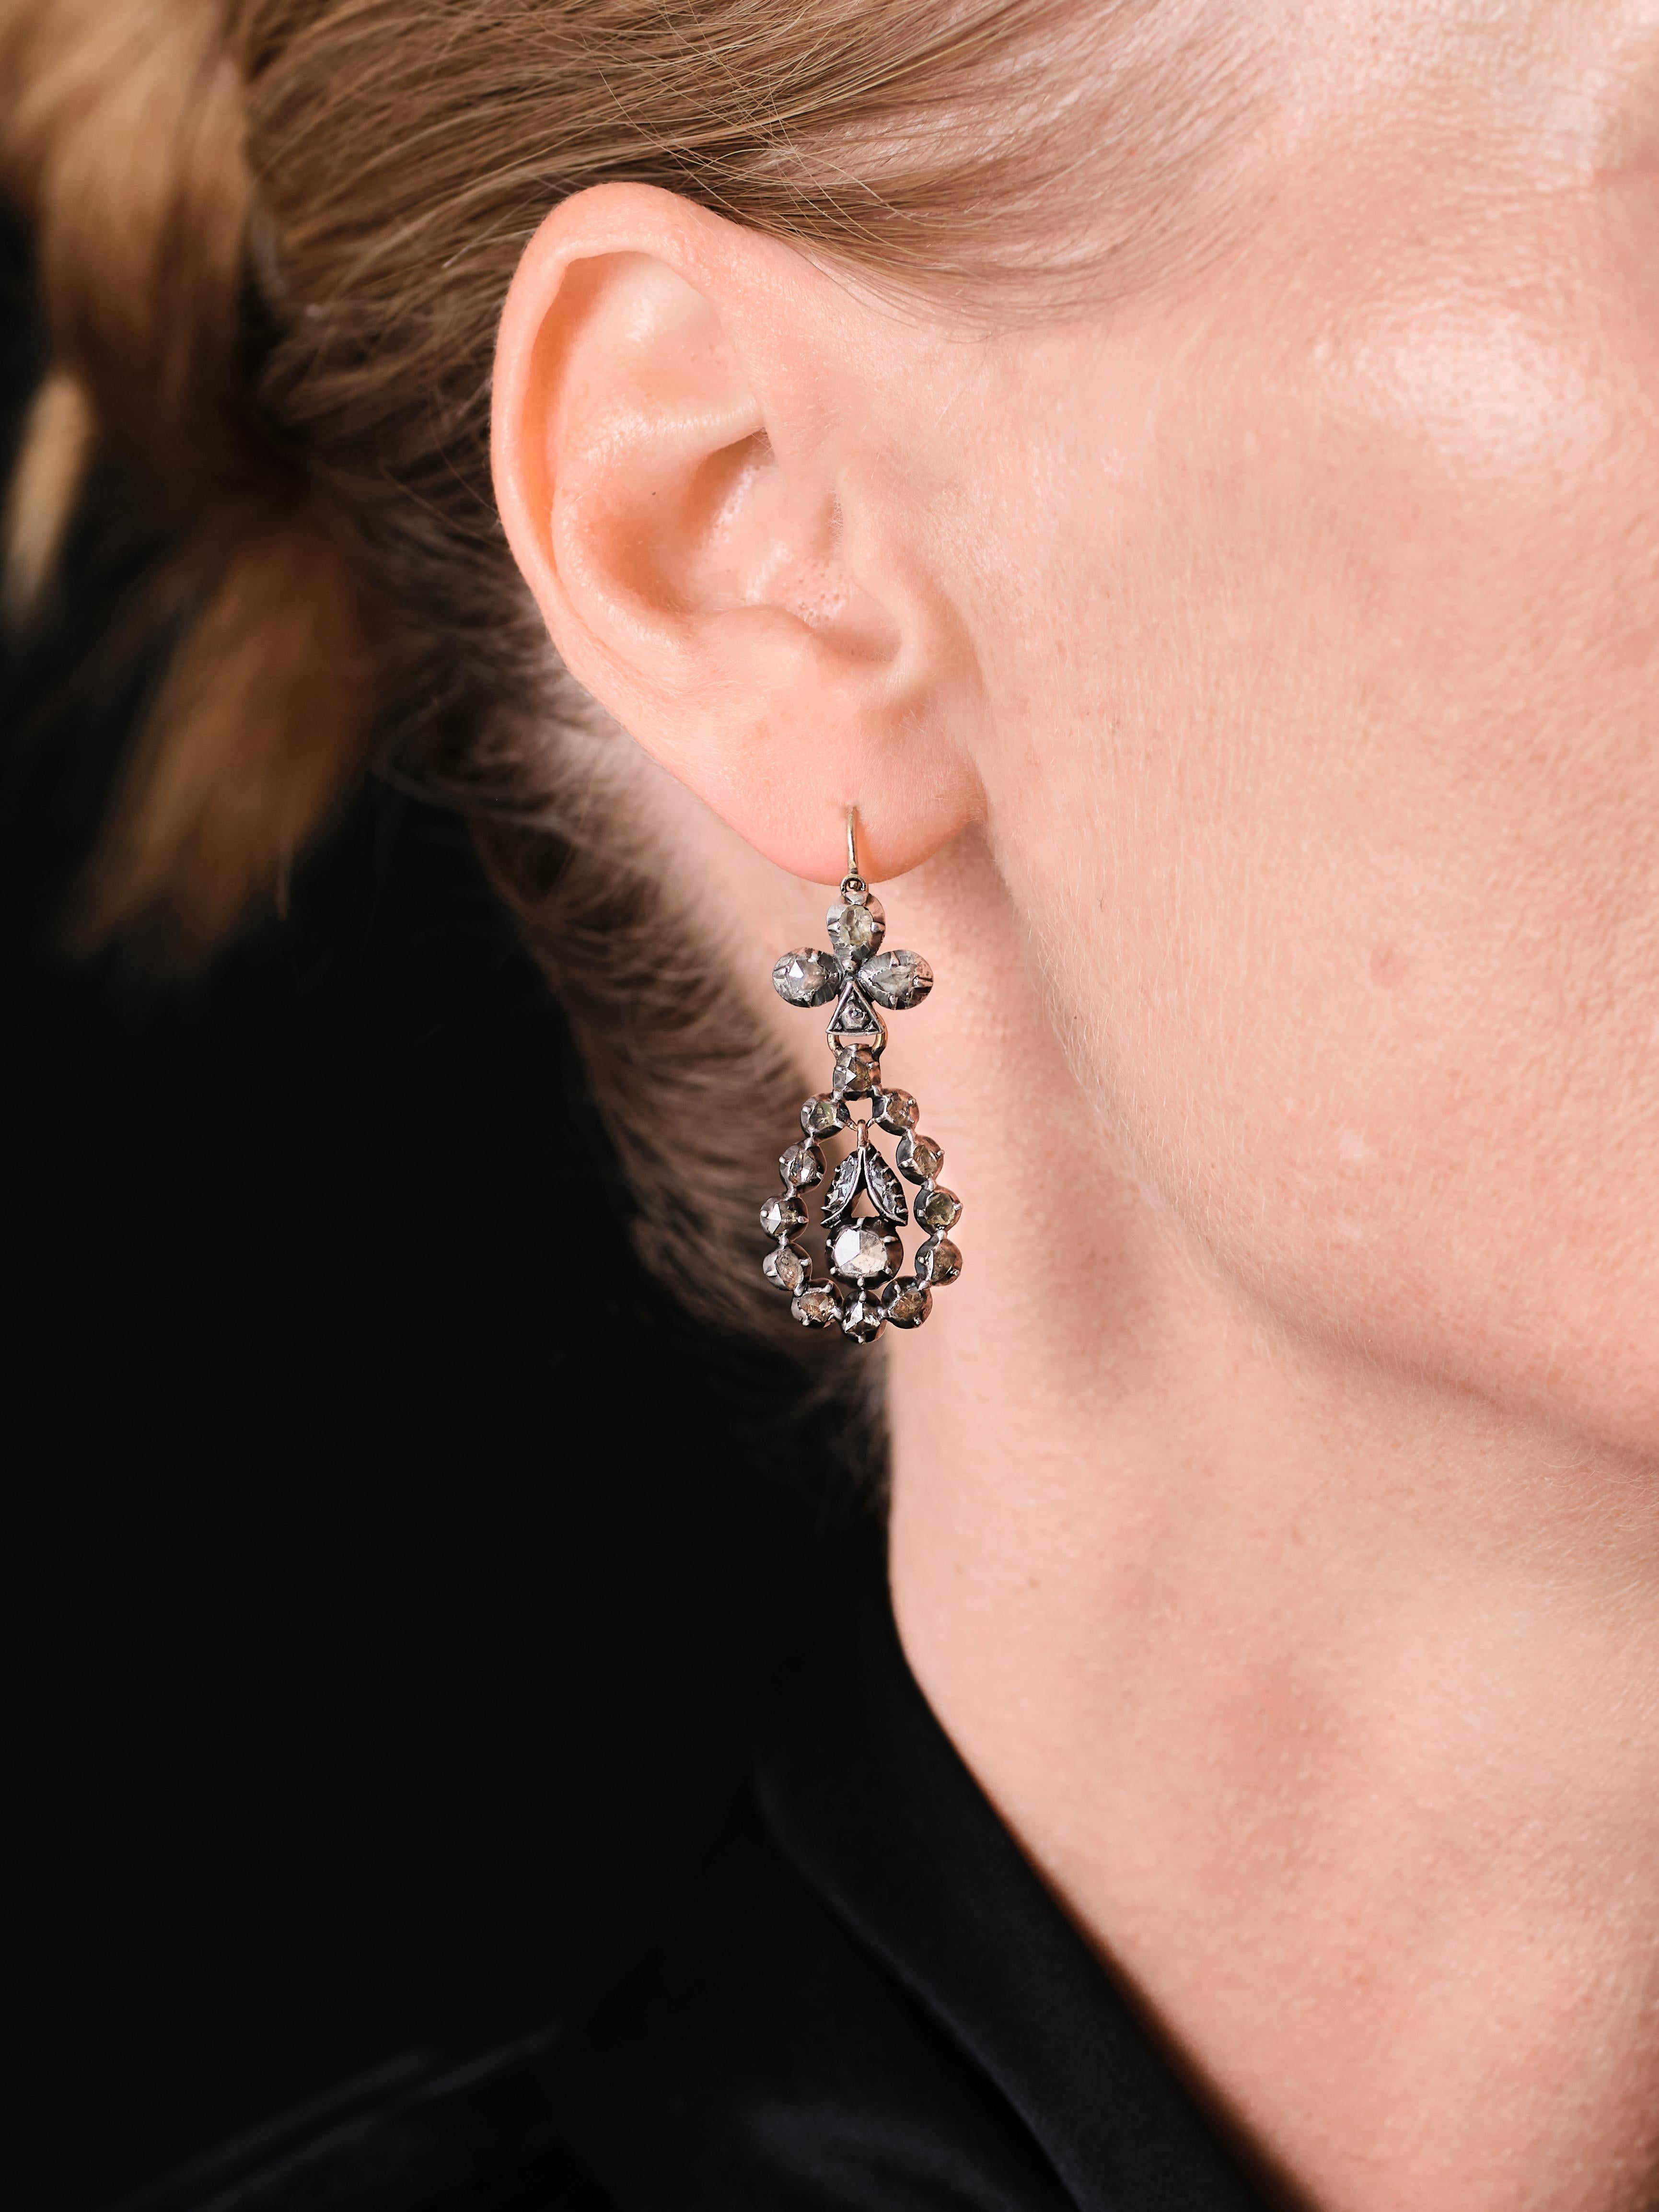 A pair of 18th century georgian / early Victorian rose cut fleur de lis night/day earrings diamond pendant earrings comprised of a round-shaped diamond in a surrounding frame and suspended from a “fleur de lis” motif surmounts. 

Day and night